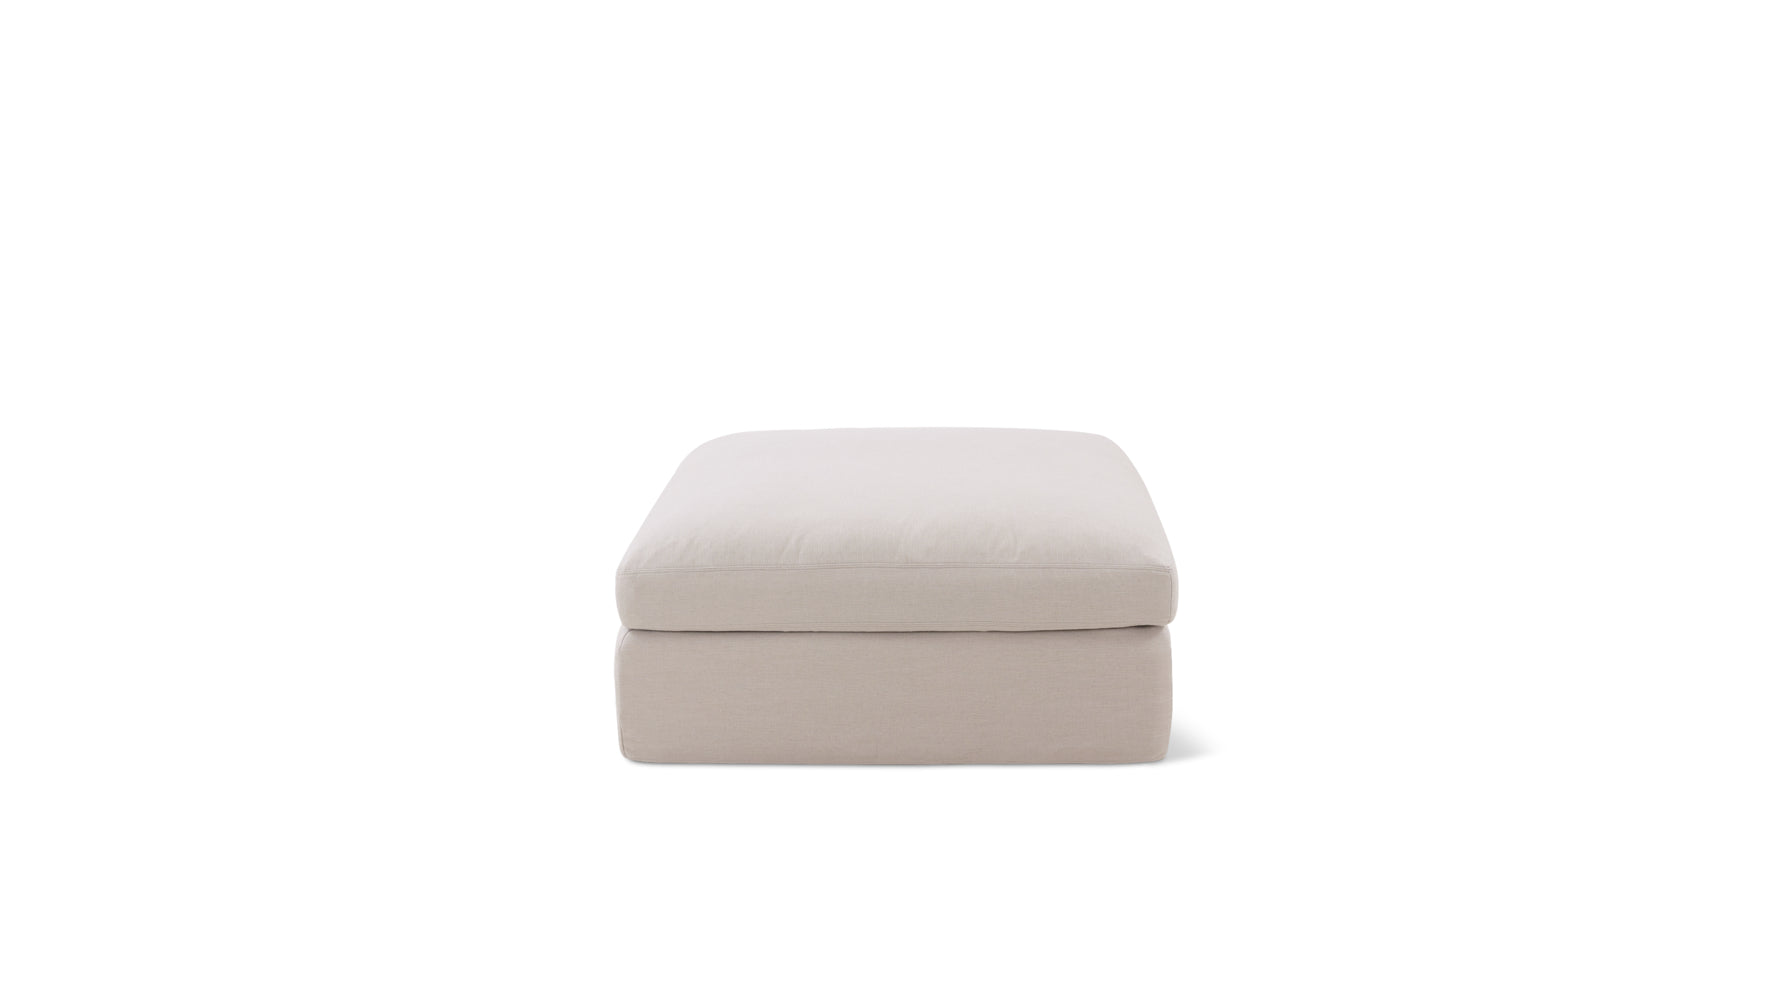 Slipcover - Get Together™ Ottoman, Large, Clay - Image 2